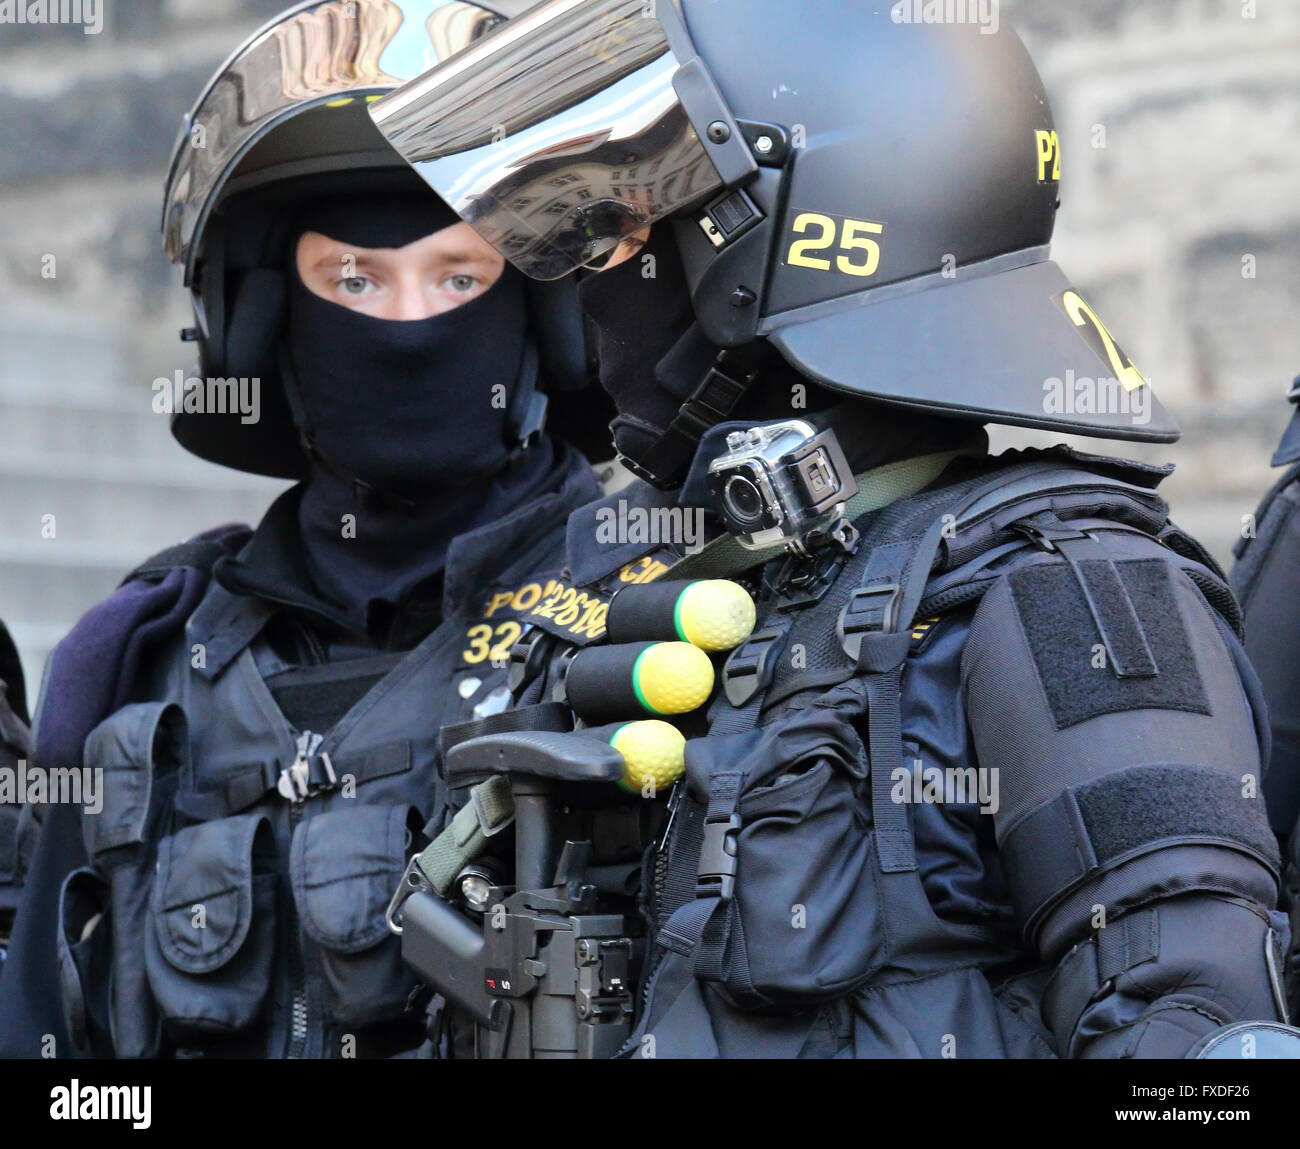 Riot police in Prague, Czech Republic, monitoring protest rally in support of Tibet that coincided with a visit by President Xi Stock Photo